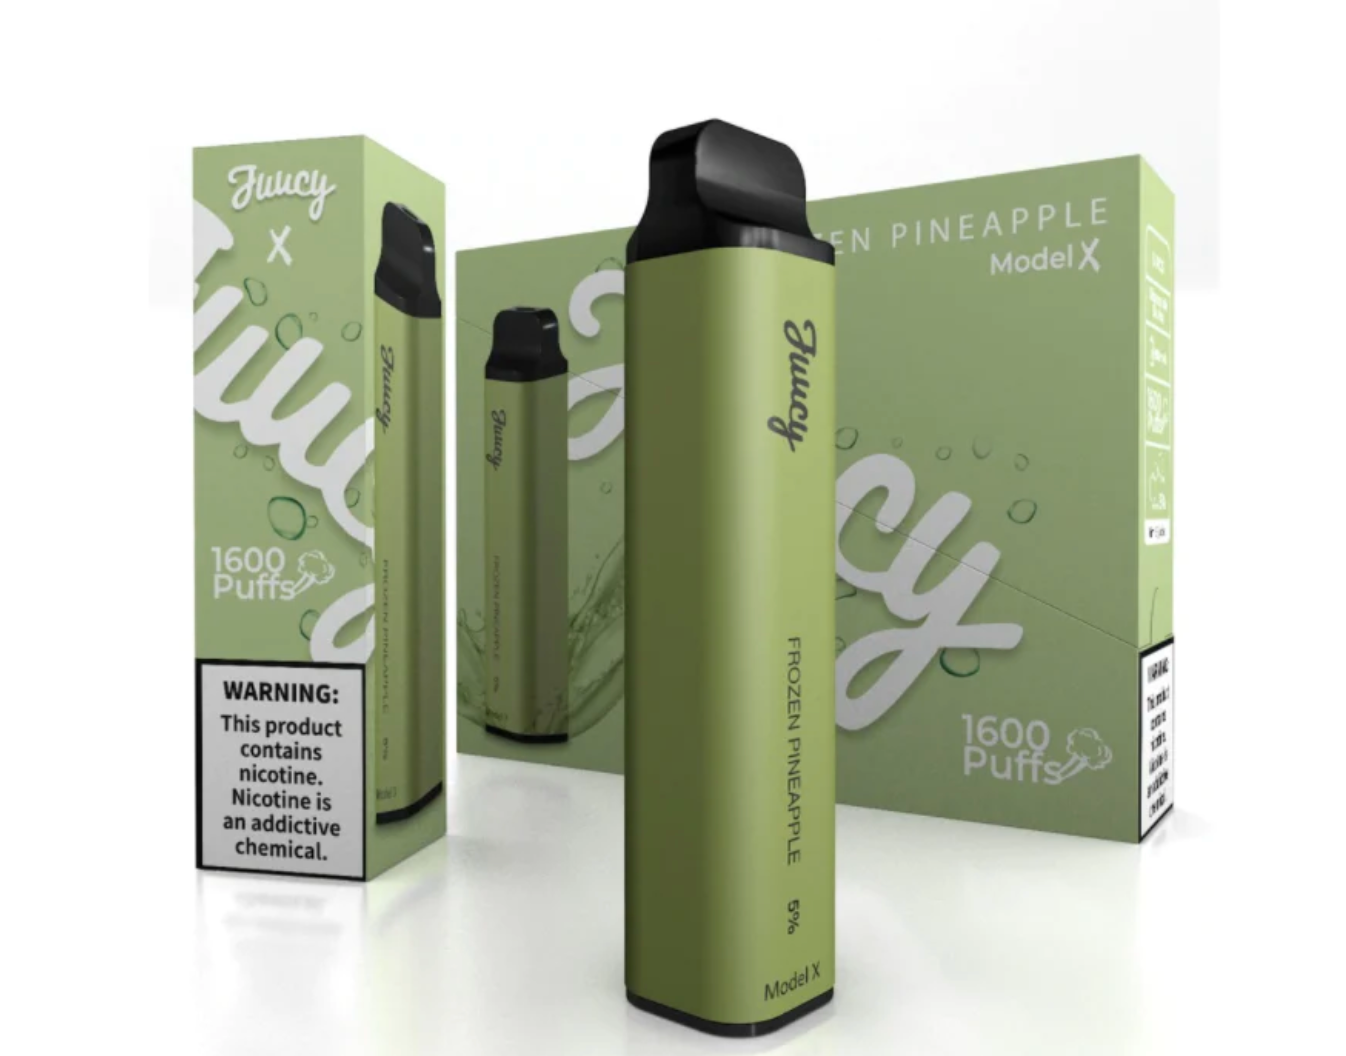 https://thesmokybox.com/products/juucy-modelx-frozen-pineapple-disposable-vape